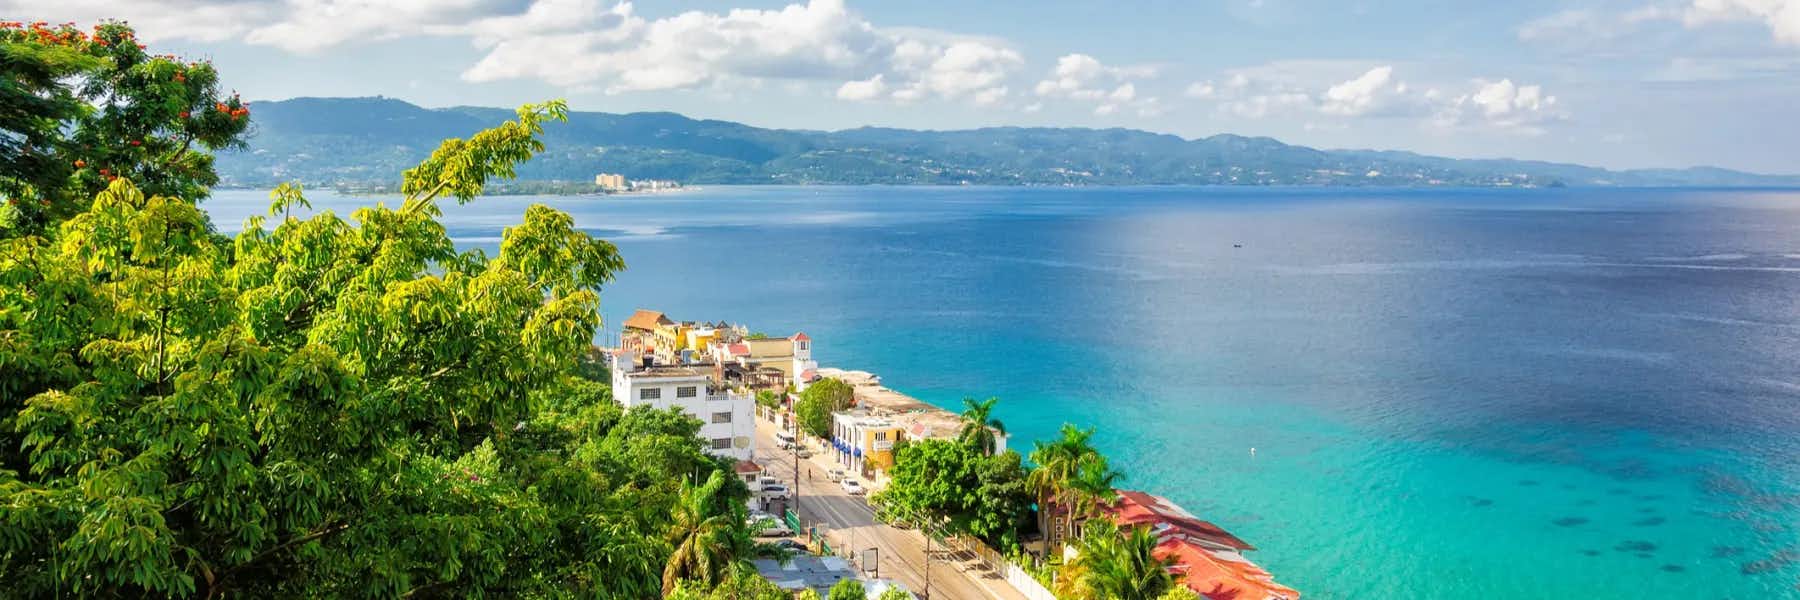 9 Things to Consider Before Moving to Jamaica